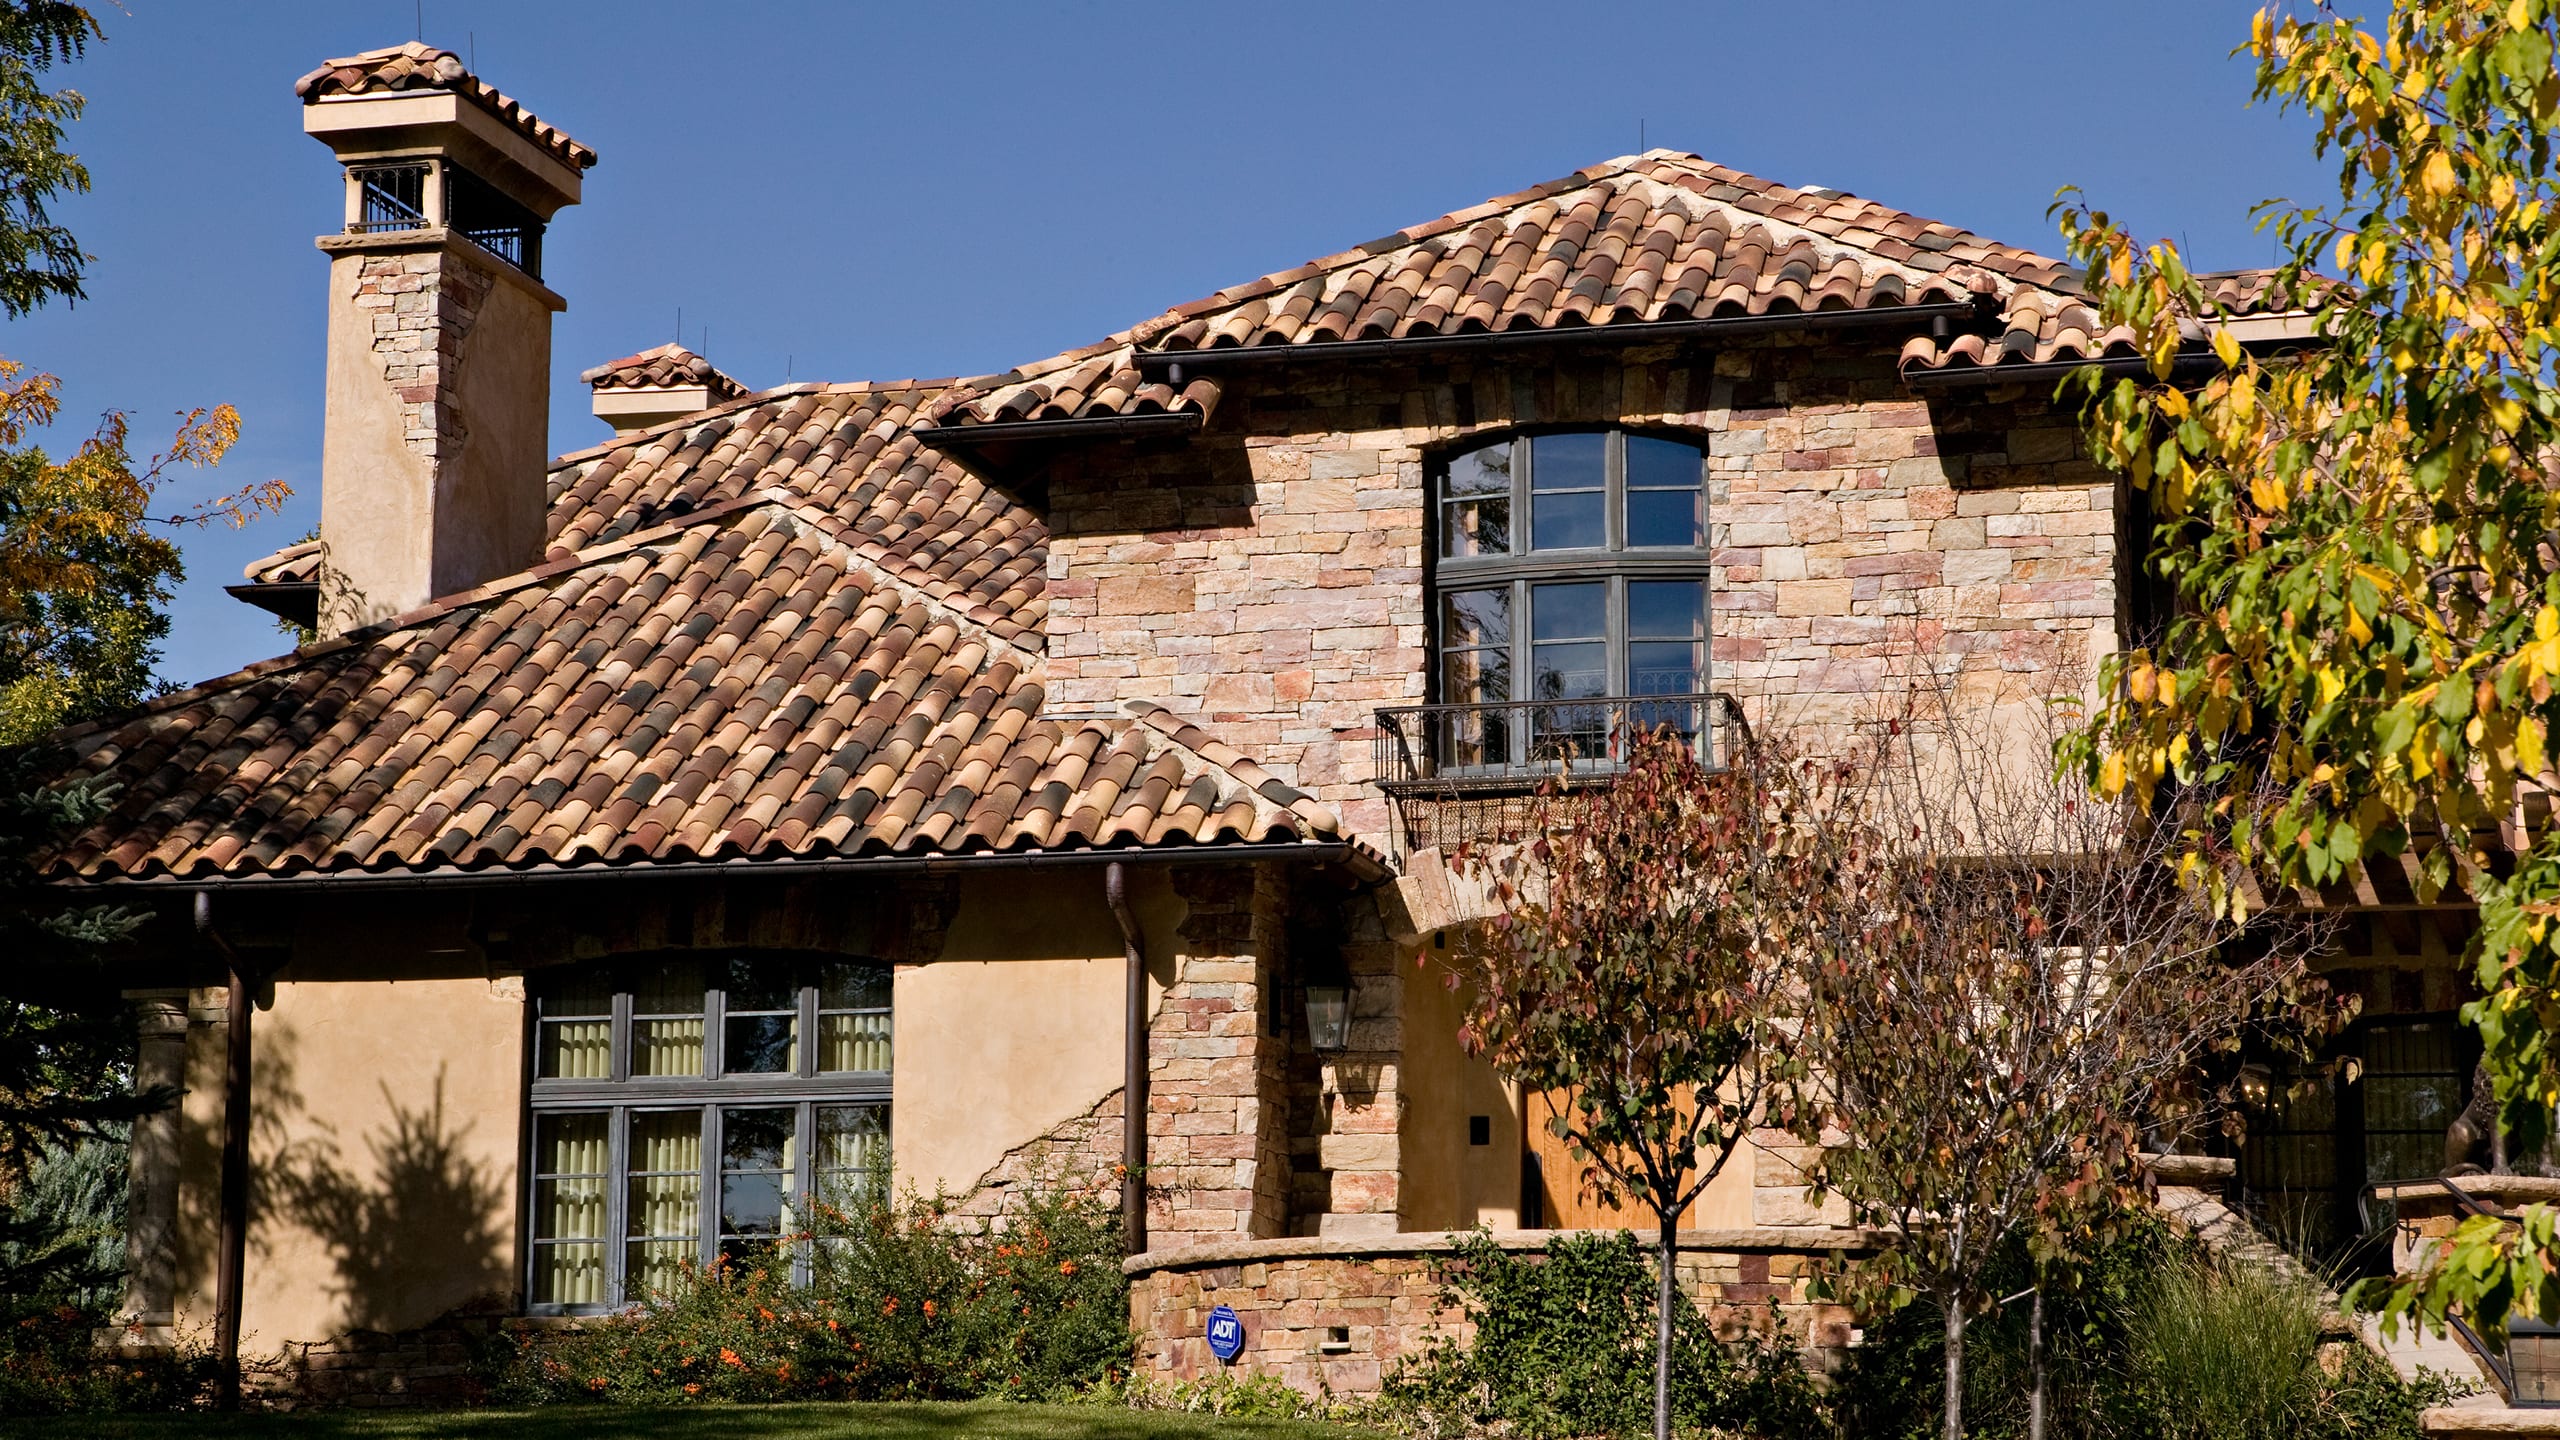 Private Residence - Cherry Hills Village Ludowici Roof Tile